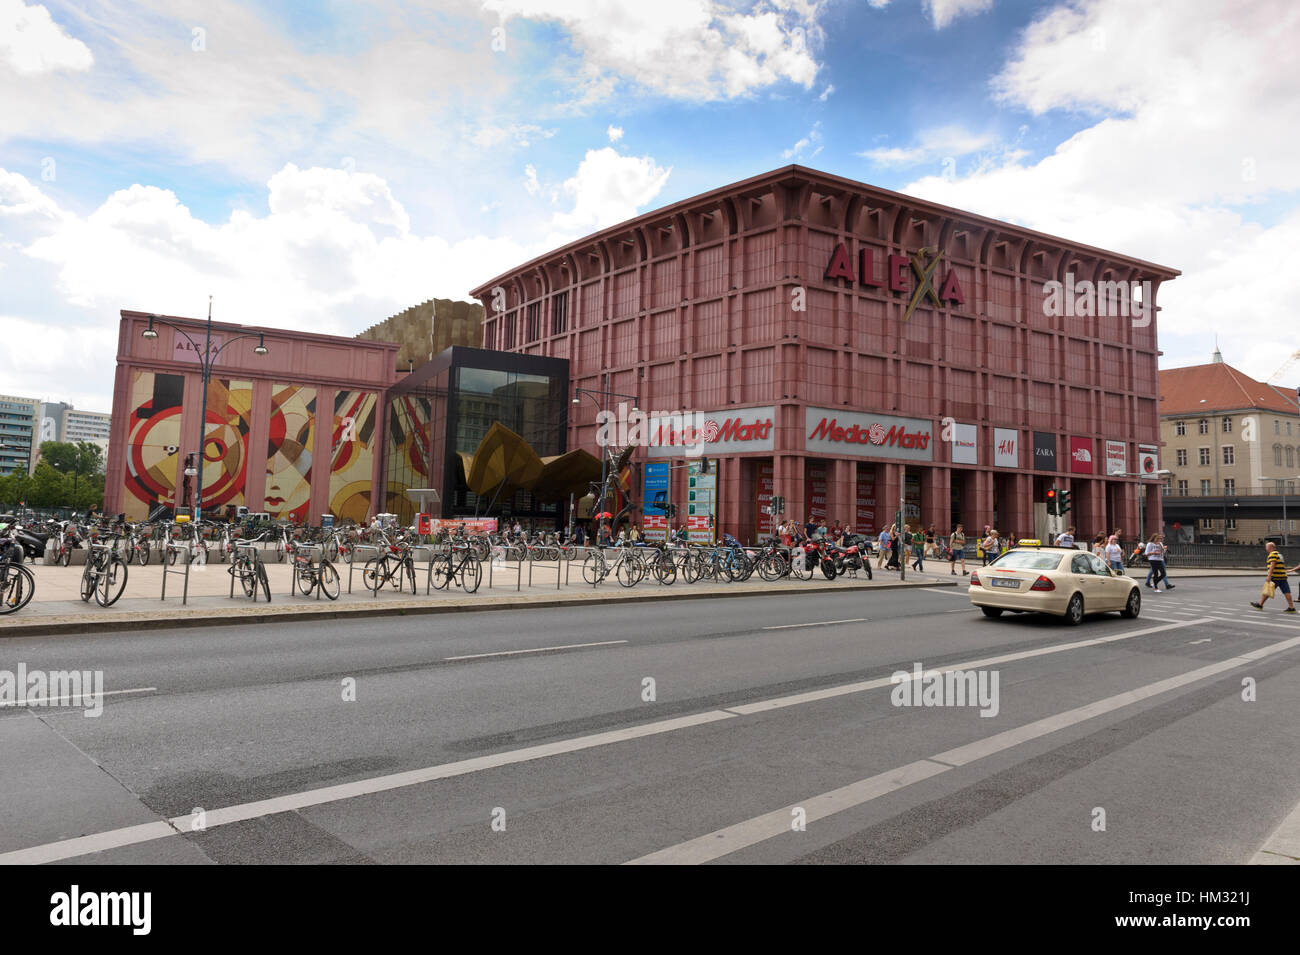 The exterior of the Alexa Shopping Center in Berlin, Germany Stock Photo -  Alamy